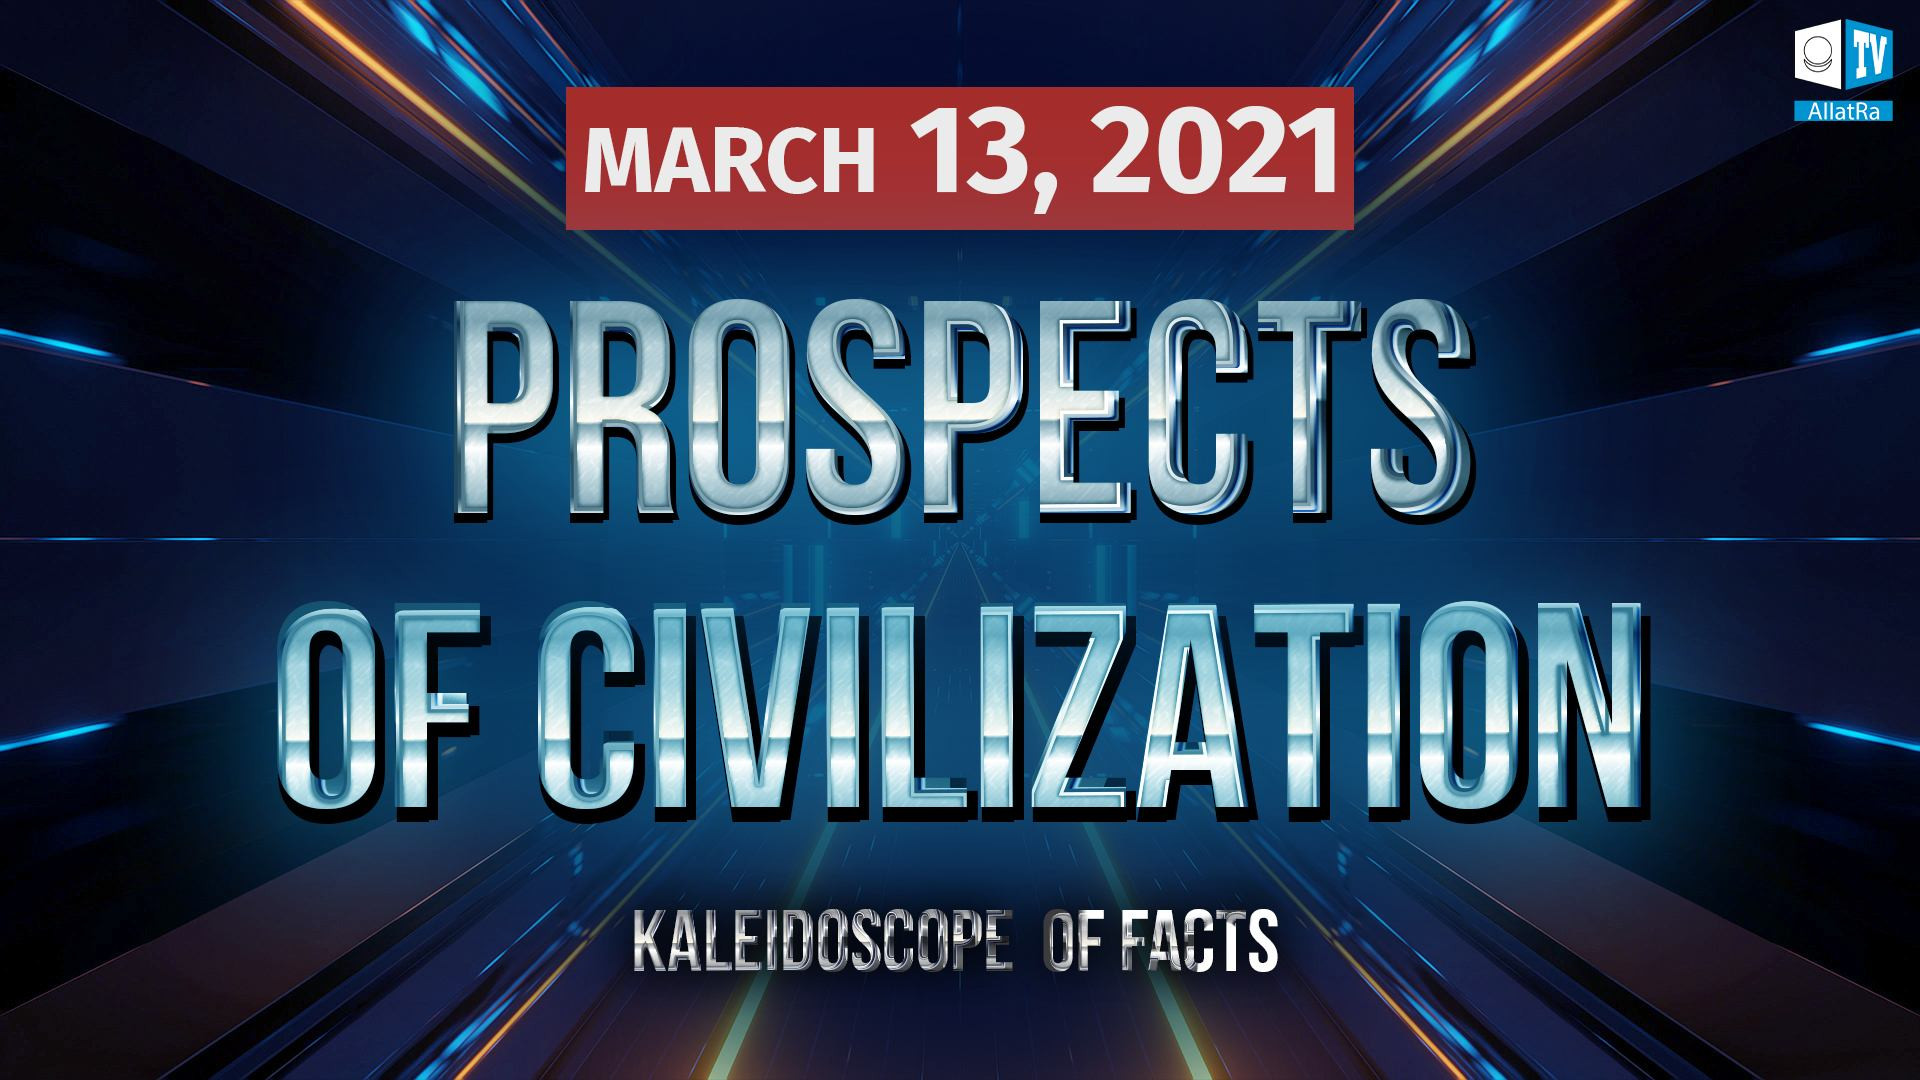 Science Fiction or Future Vision? | Kaleidoscope of Facts Trailer